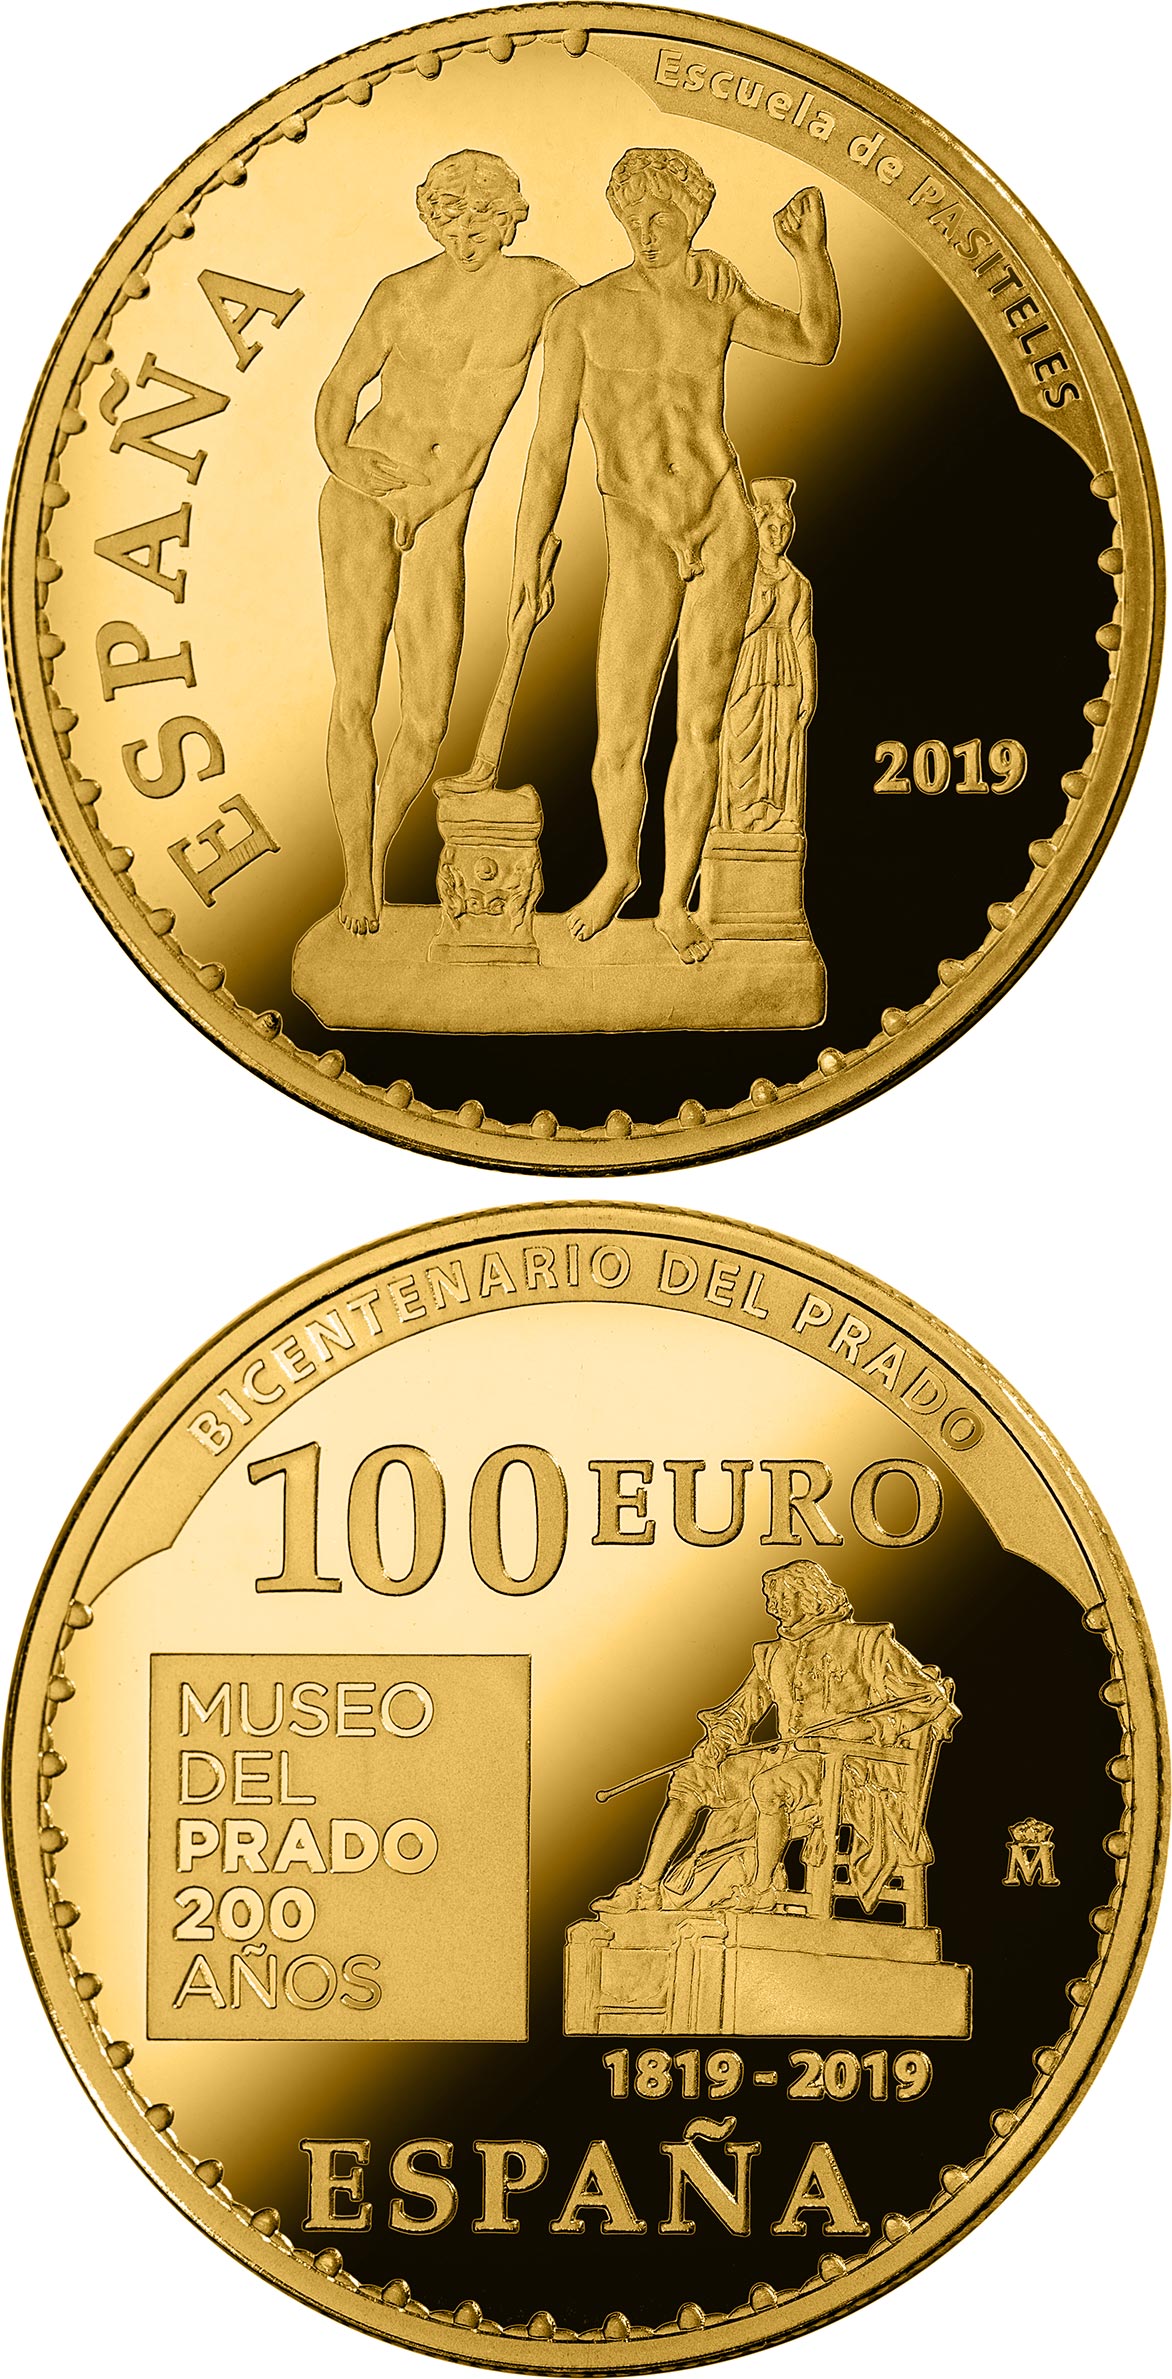 Image of 100 euro coin - Bicentenary of the Museum del Prado - Orestes y Pílades or Grupo de San Ildefonso | Spain 2019.  The Gold coin is of Proof quality.